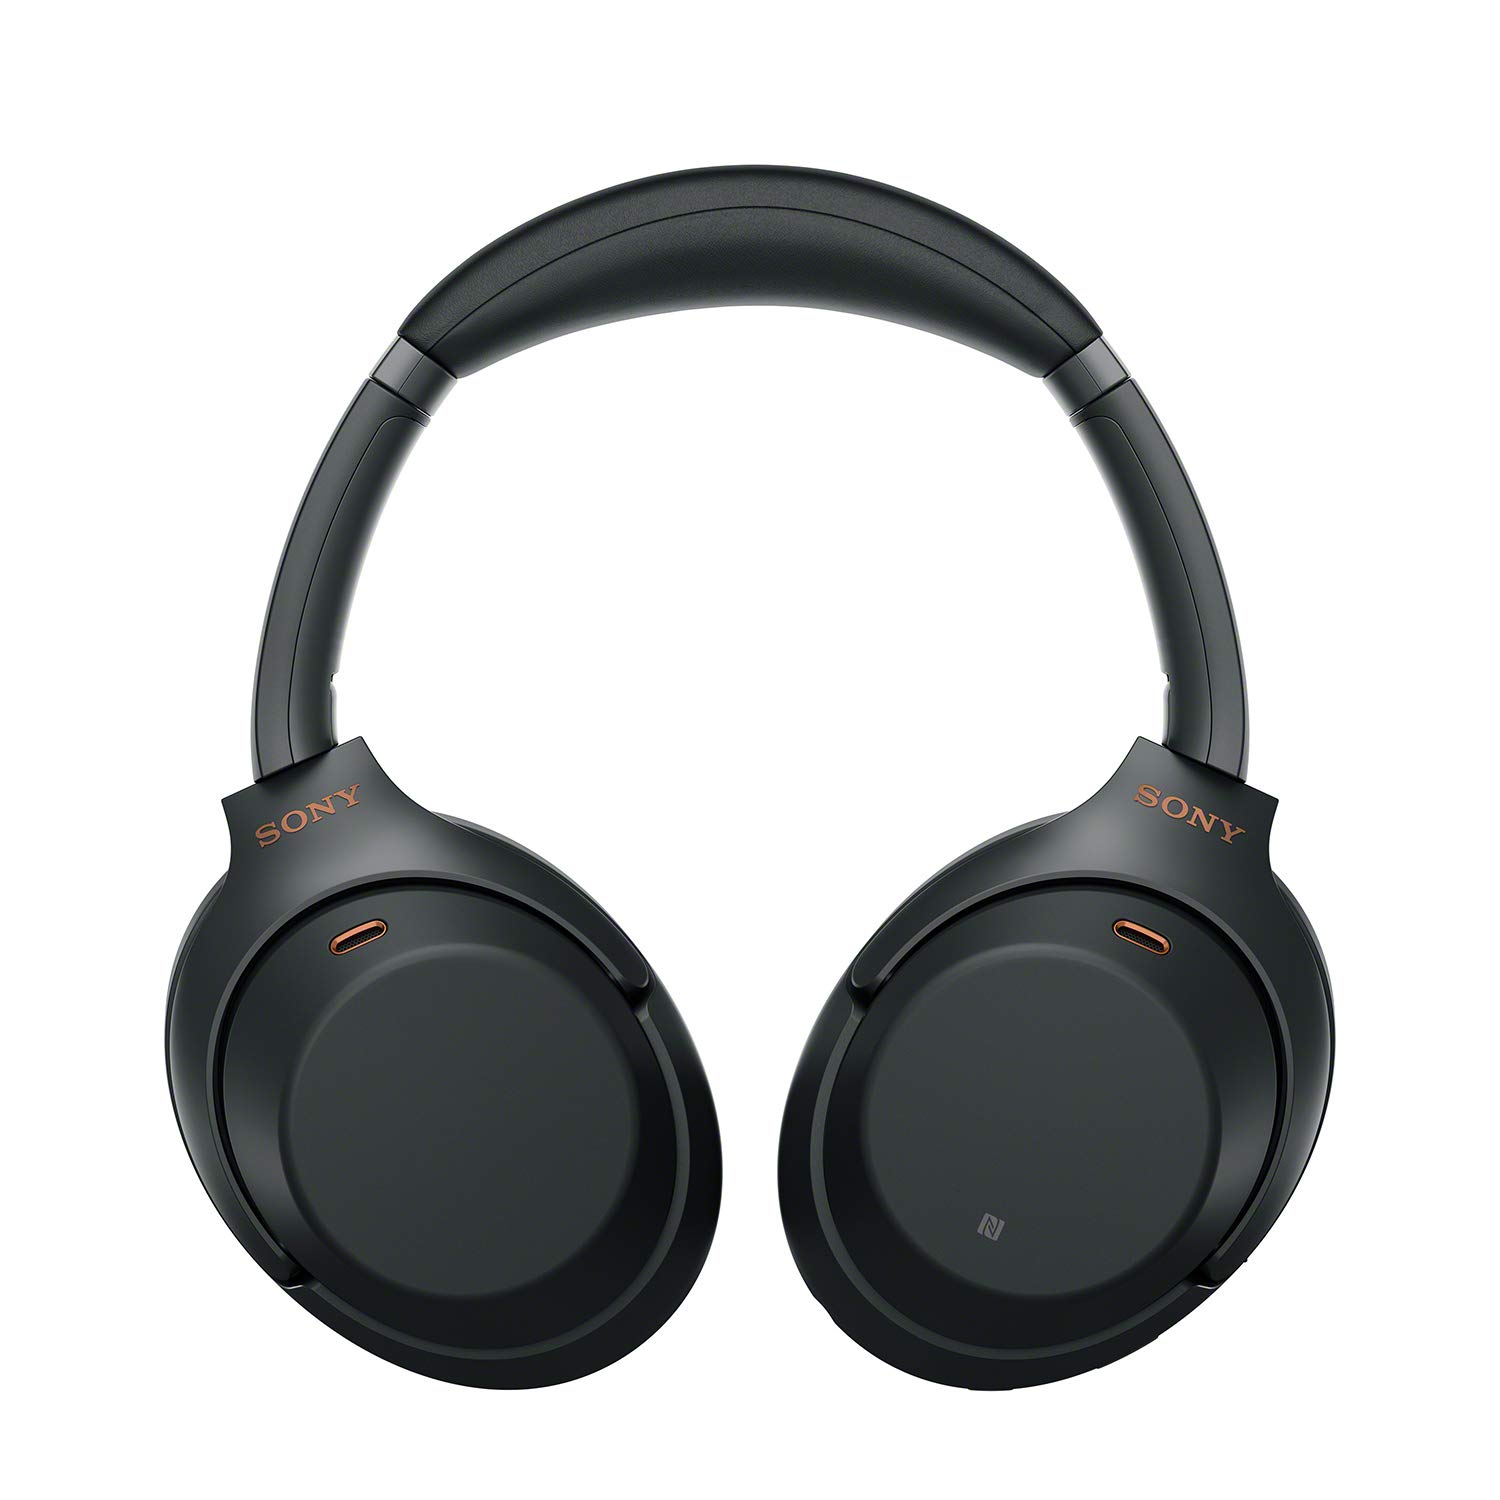 Sony WH-1000XM3 Wireless Headphone Price in India And Full